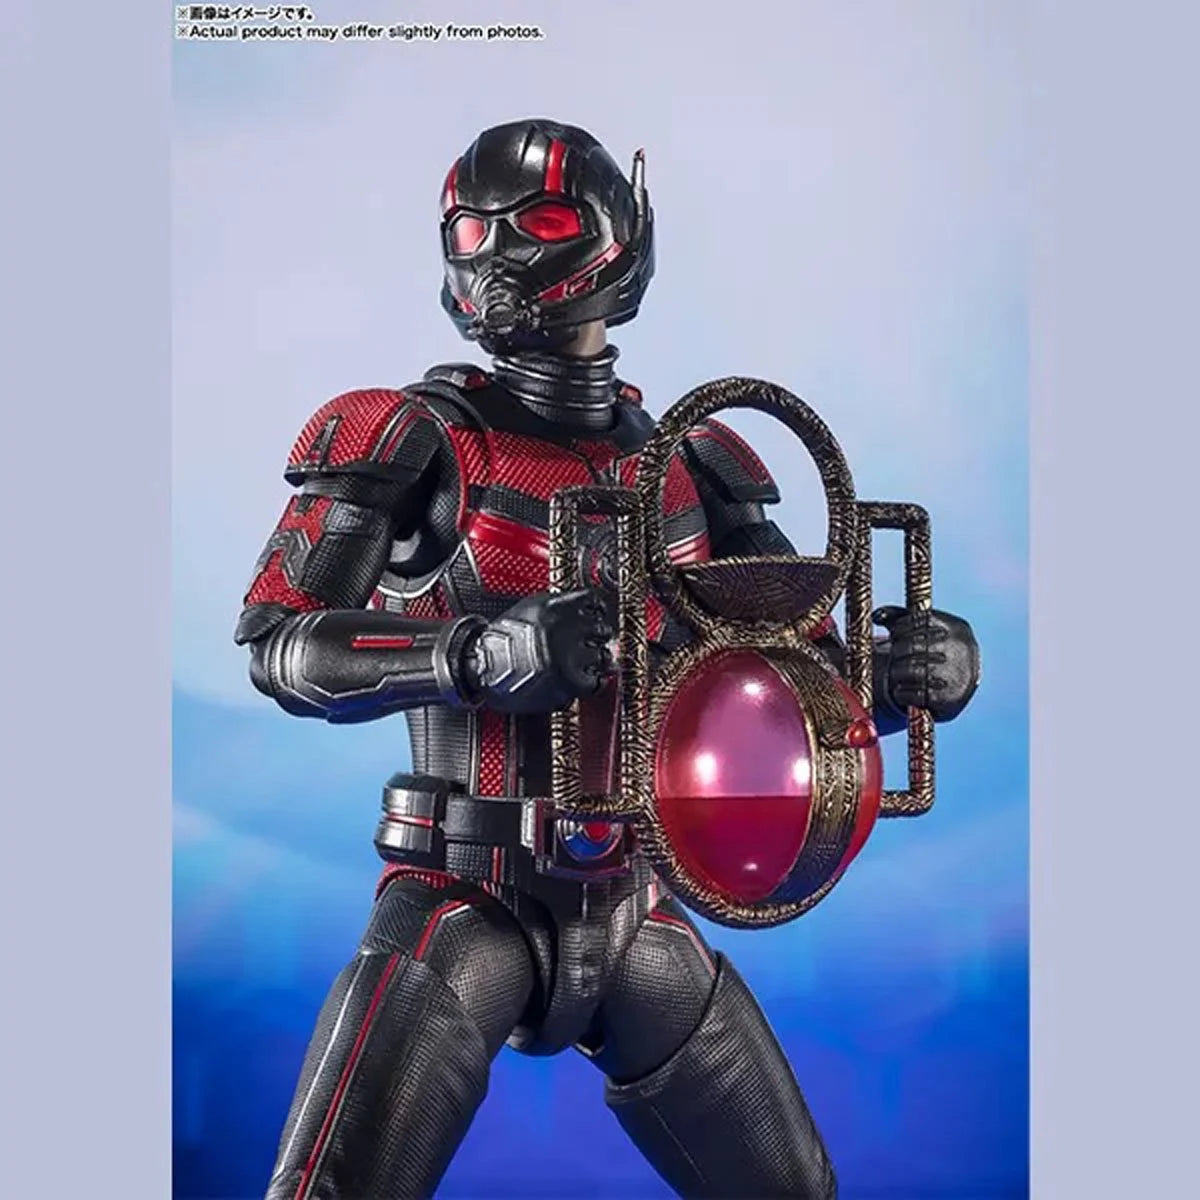 Quantumania Ant-Man Action Figure by S.H.Figuarts -SH Figuarts - India - www.superherotoystore.com